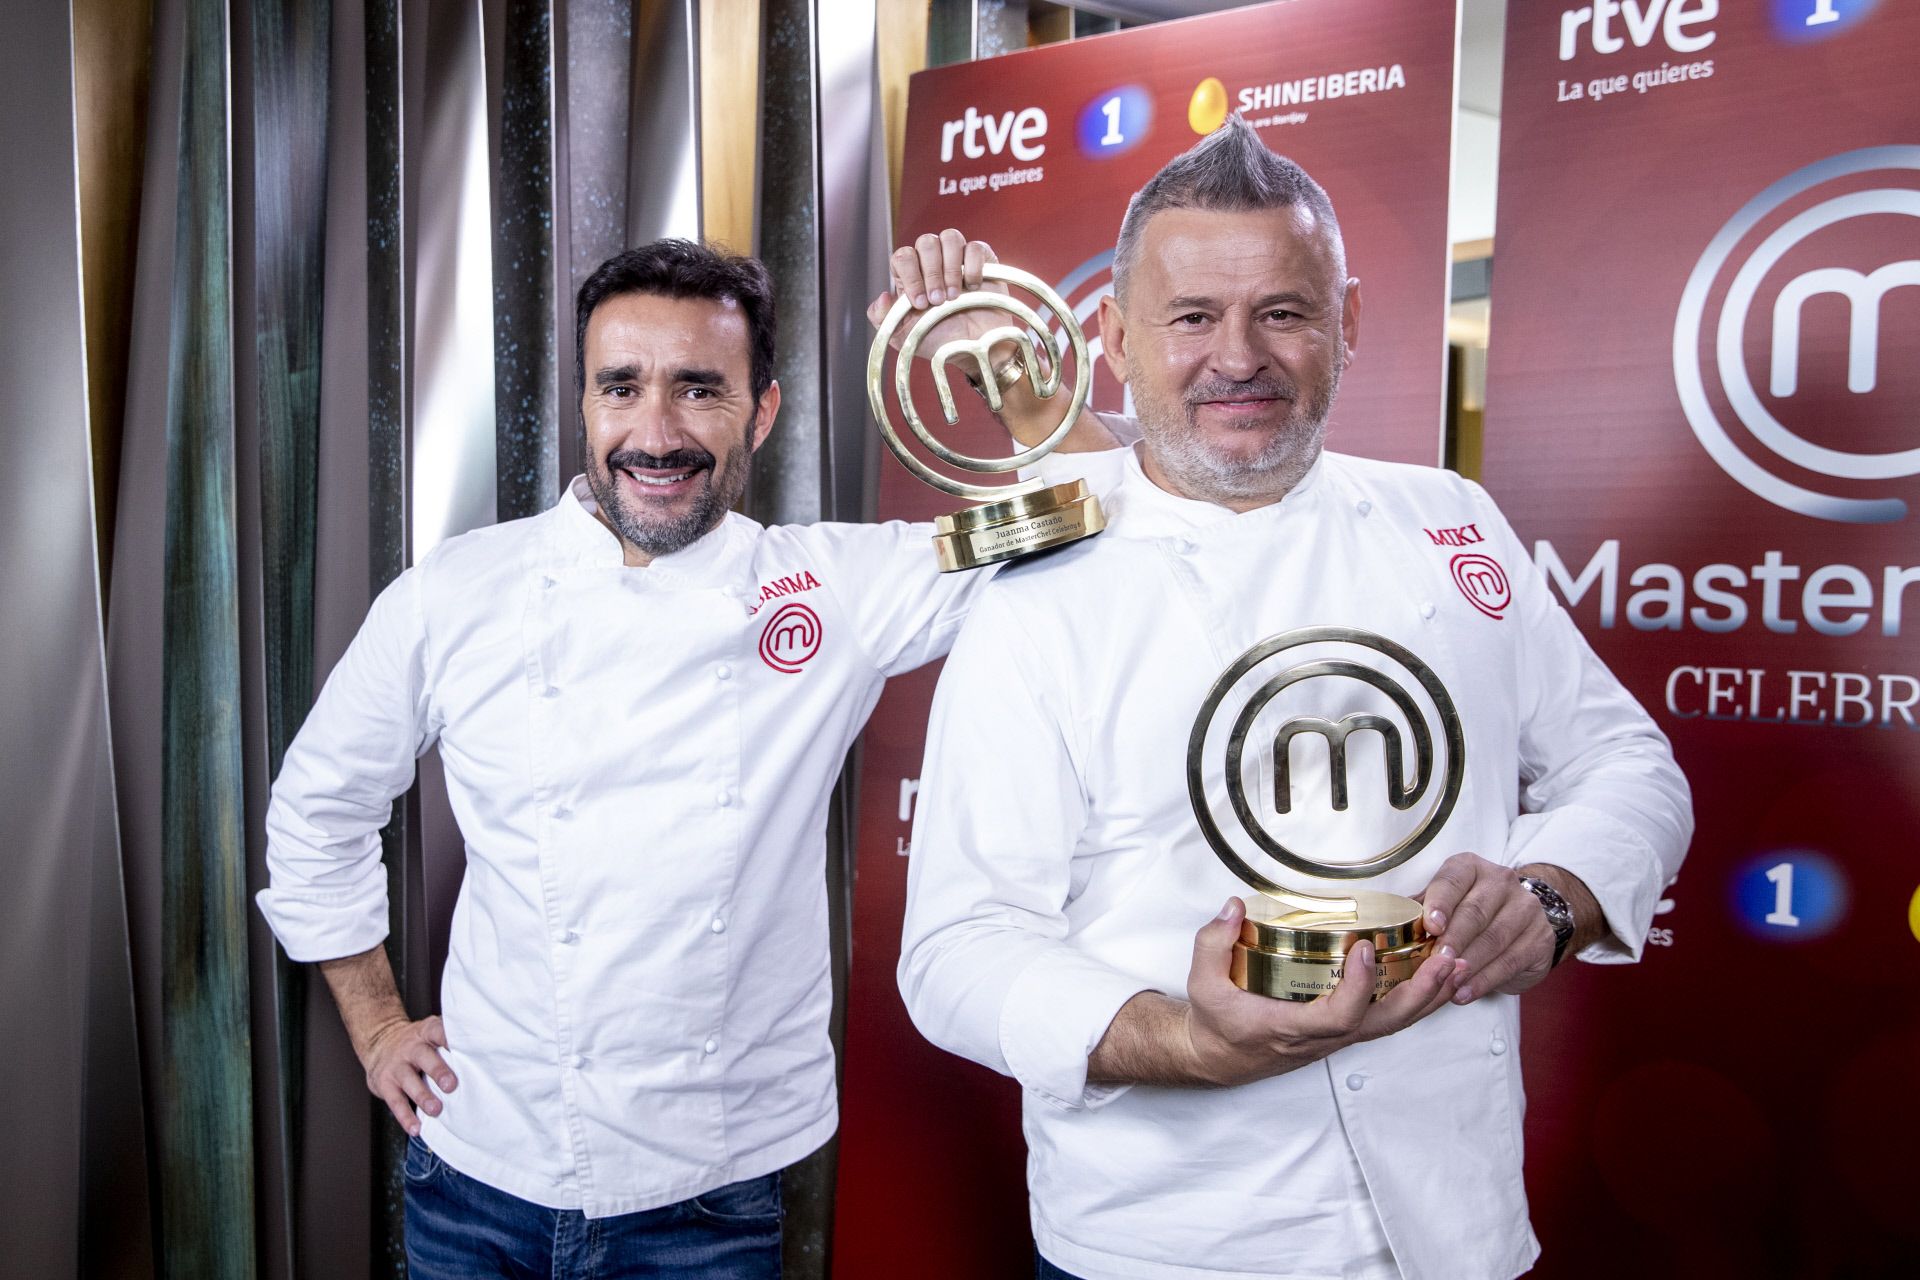 journalist juanma castaño and miki nadal during act as winner masterchef celebrity in madrid on tuesday, 30 november 2021